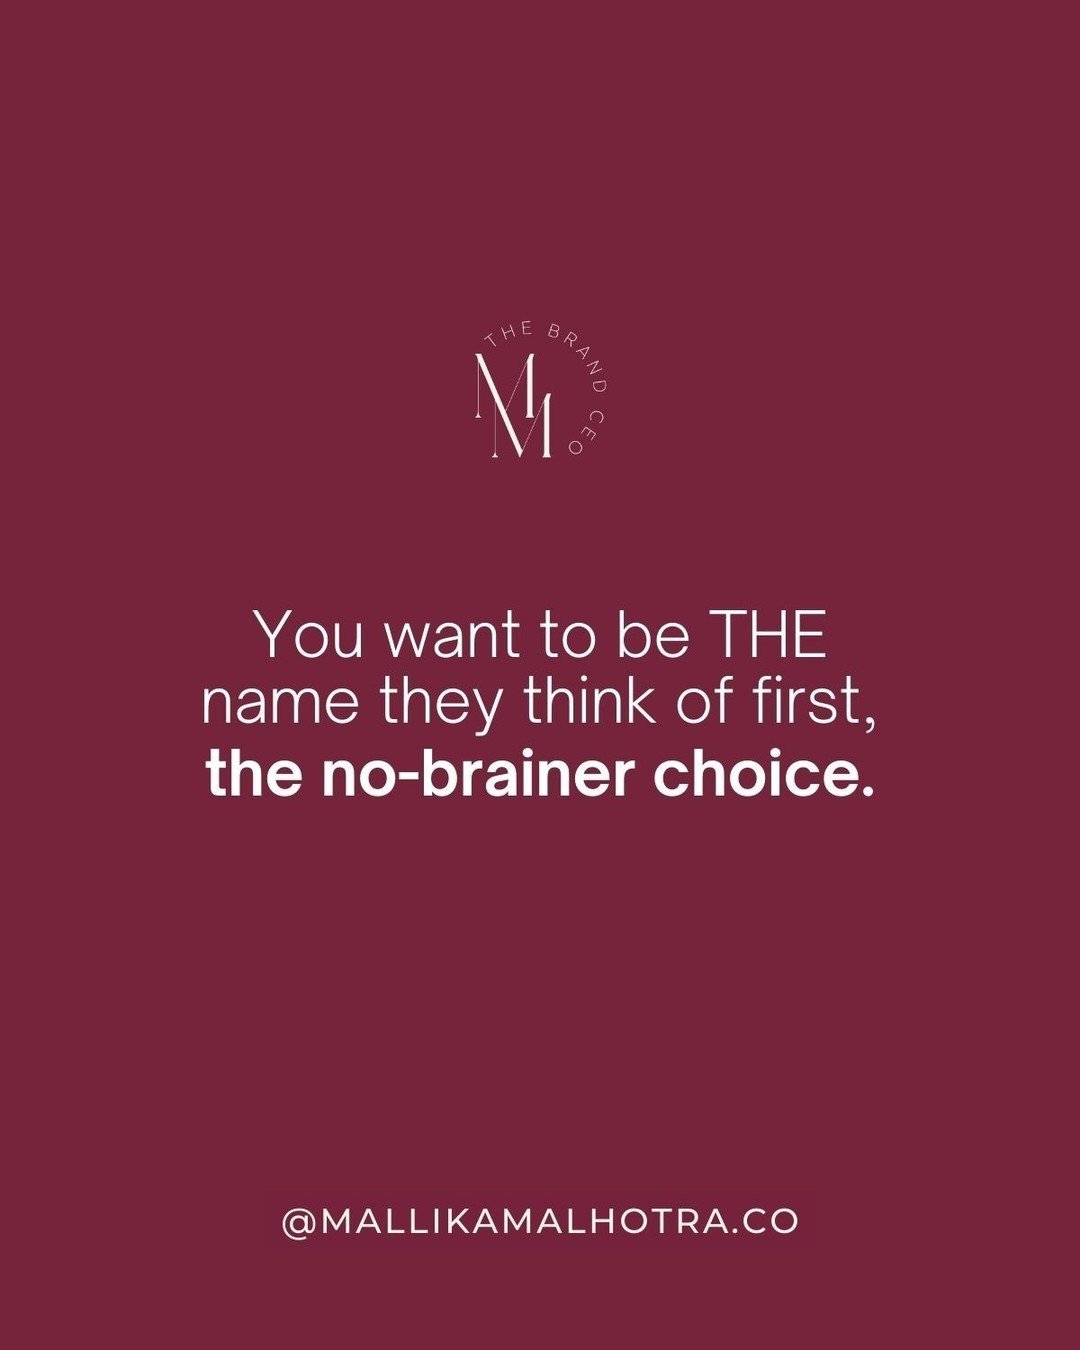 Stand out, don&rsquo;t just stand by: this is your brand's call to specialize! 🌟⁠
⁠
In a marketplace overflowing with options, your brand&rsquo;s voice needs to do more than just echo&mdash;it needs to resonate. Specialization isn&rsquo;t a narrowin